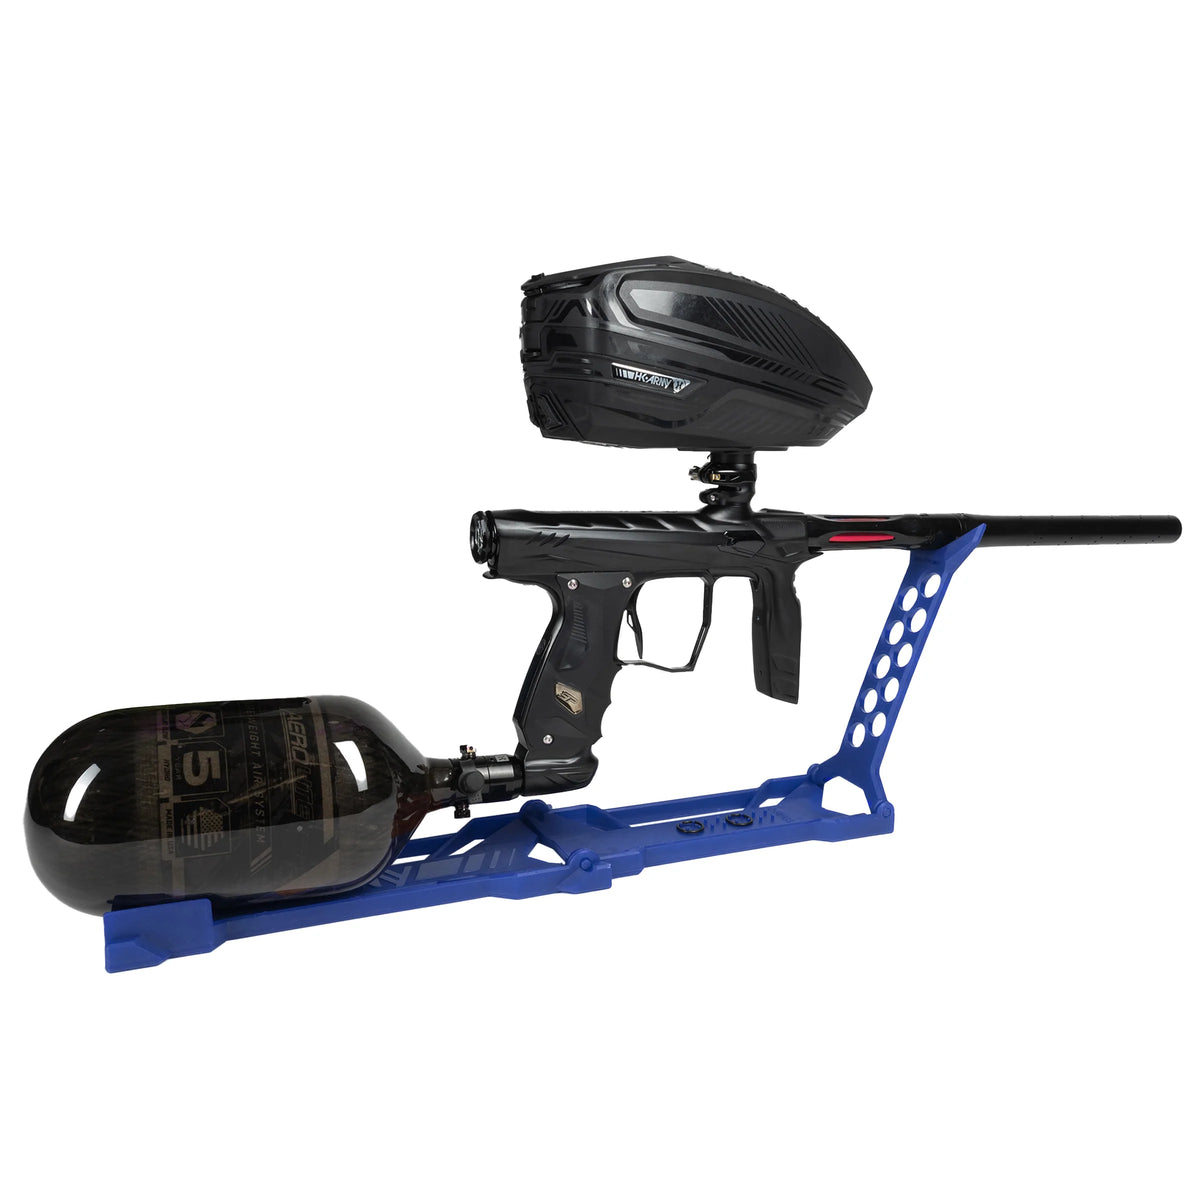 Joint Folding Paintball Gun Stand - Blue | Hk Army